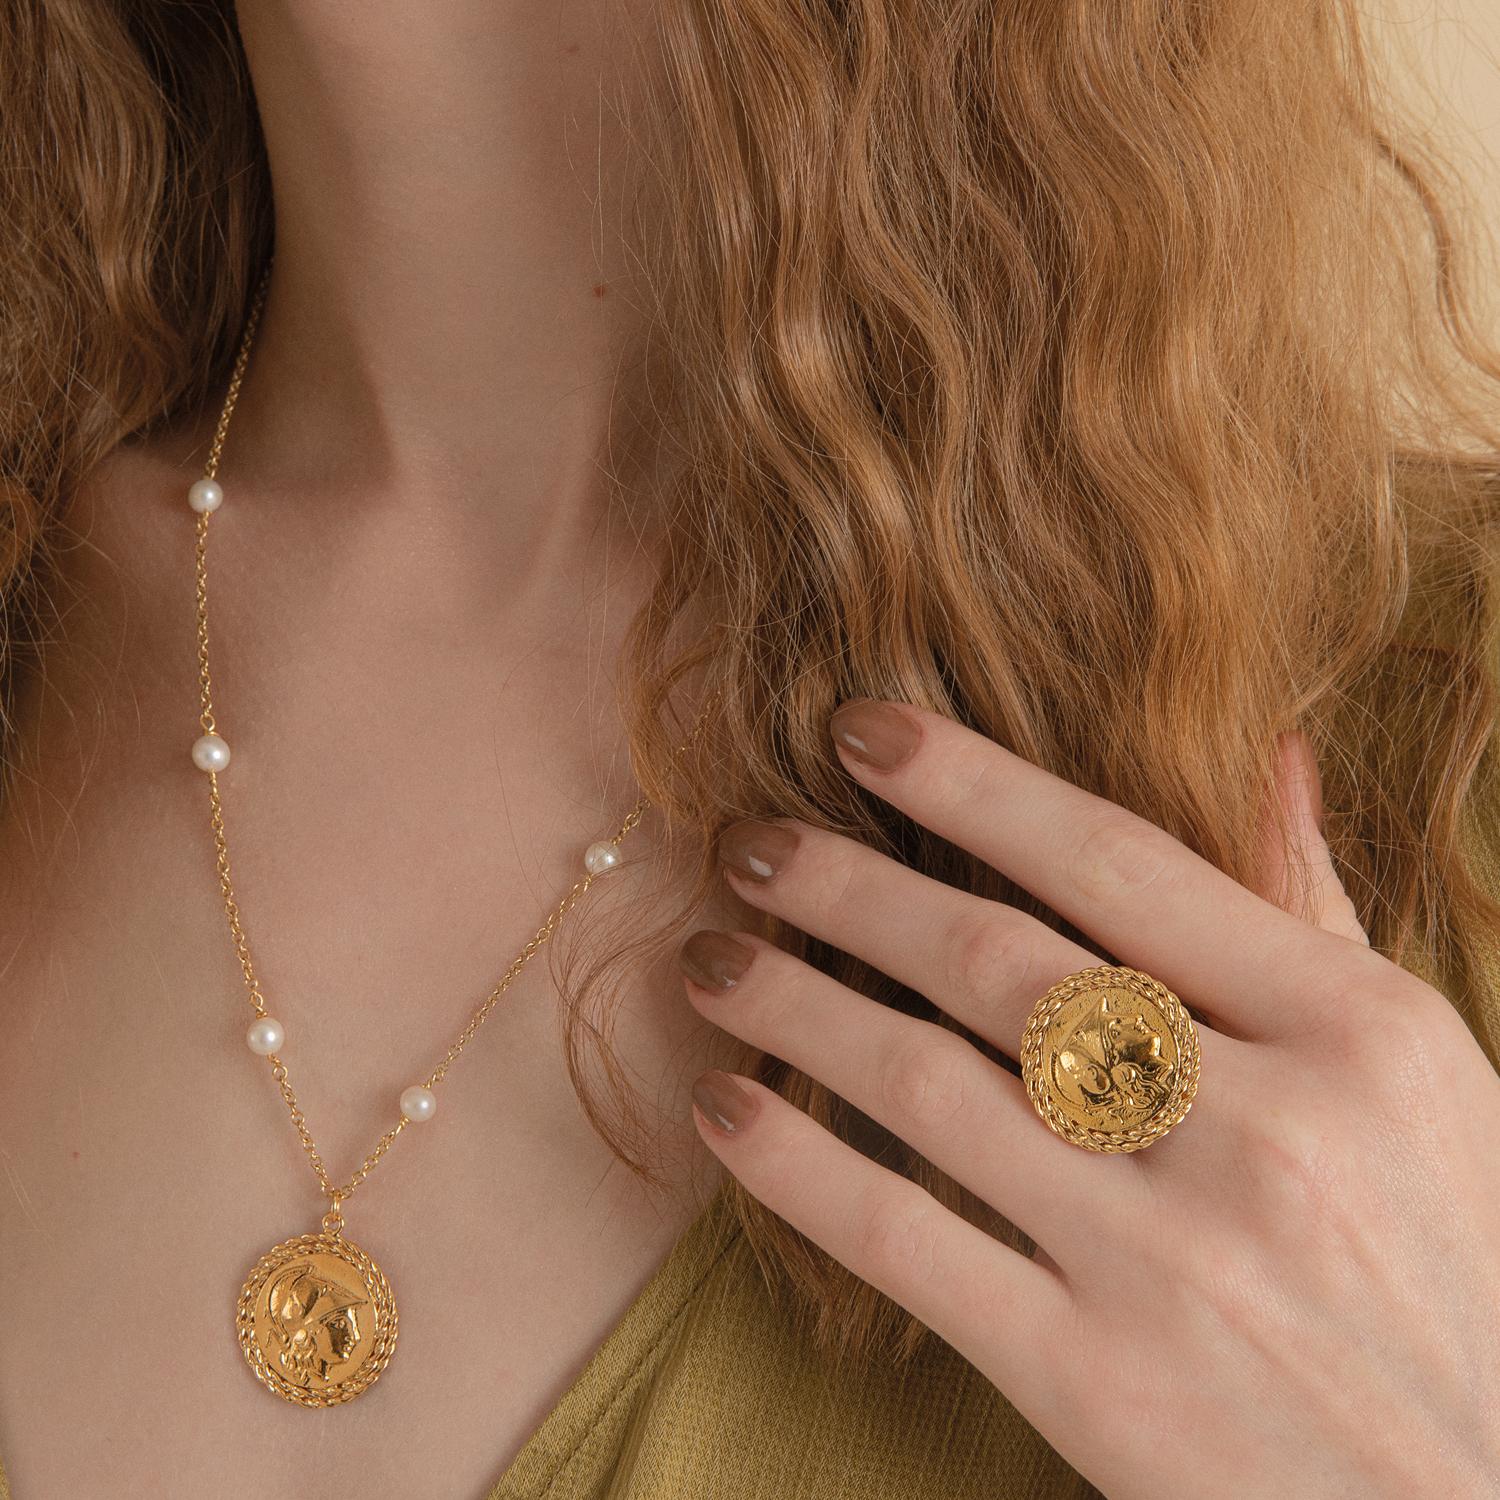 'But my heart breaks for Odysseus, that seasoned veteran cursed by fate so long, far from his loved ones still, he suffers torments.'

The 'Athena' medallion by Vintouch Jewels is cast from 24 karat gold vermeil with an antique coin depicting Greek